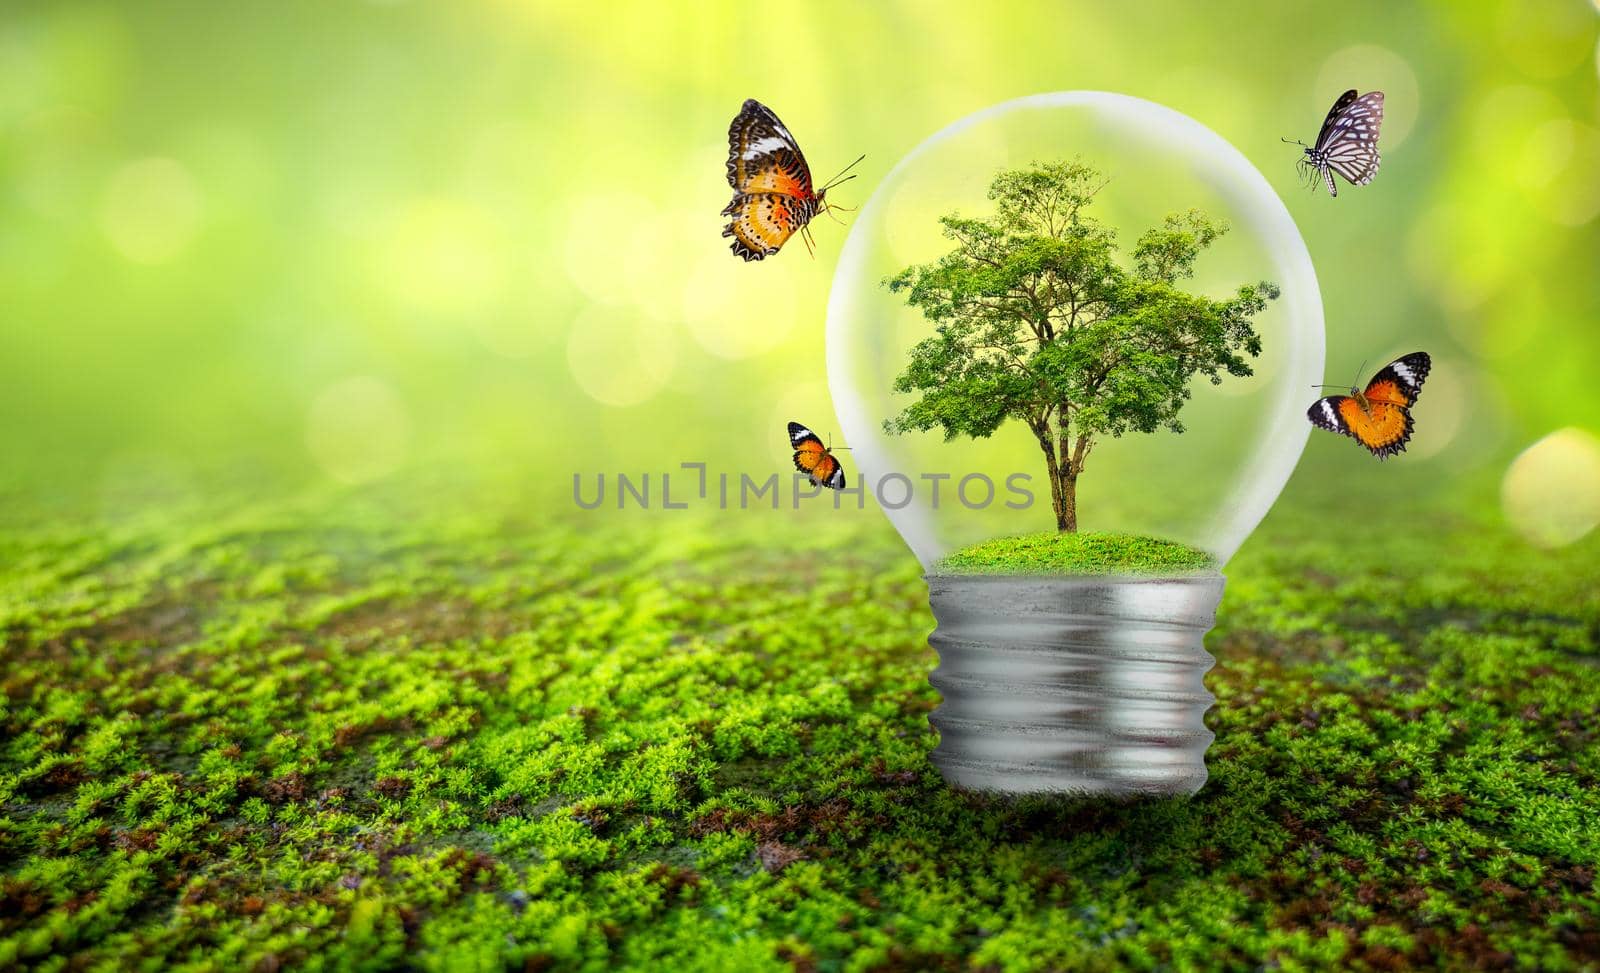 The bulb is located on the inside with leaves forest and the trees are in the light. Concepts of environmental conservation and global warming plant growing inside lamp bulb over dry by sarayut_thaneerat